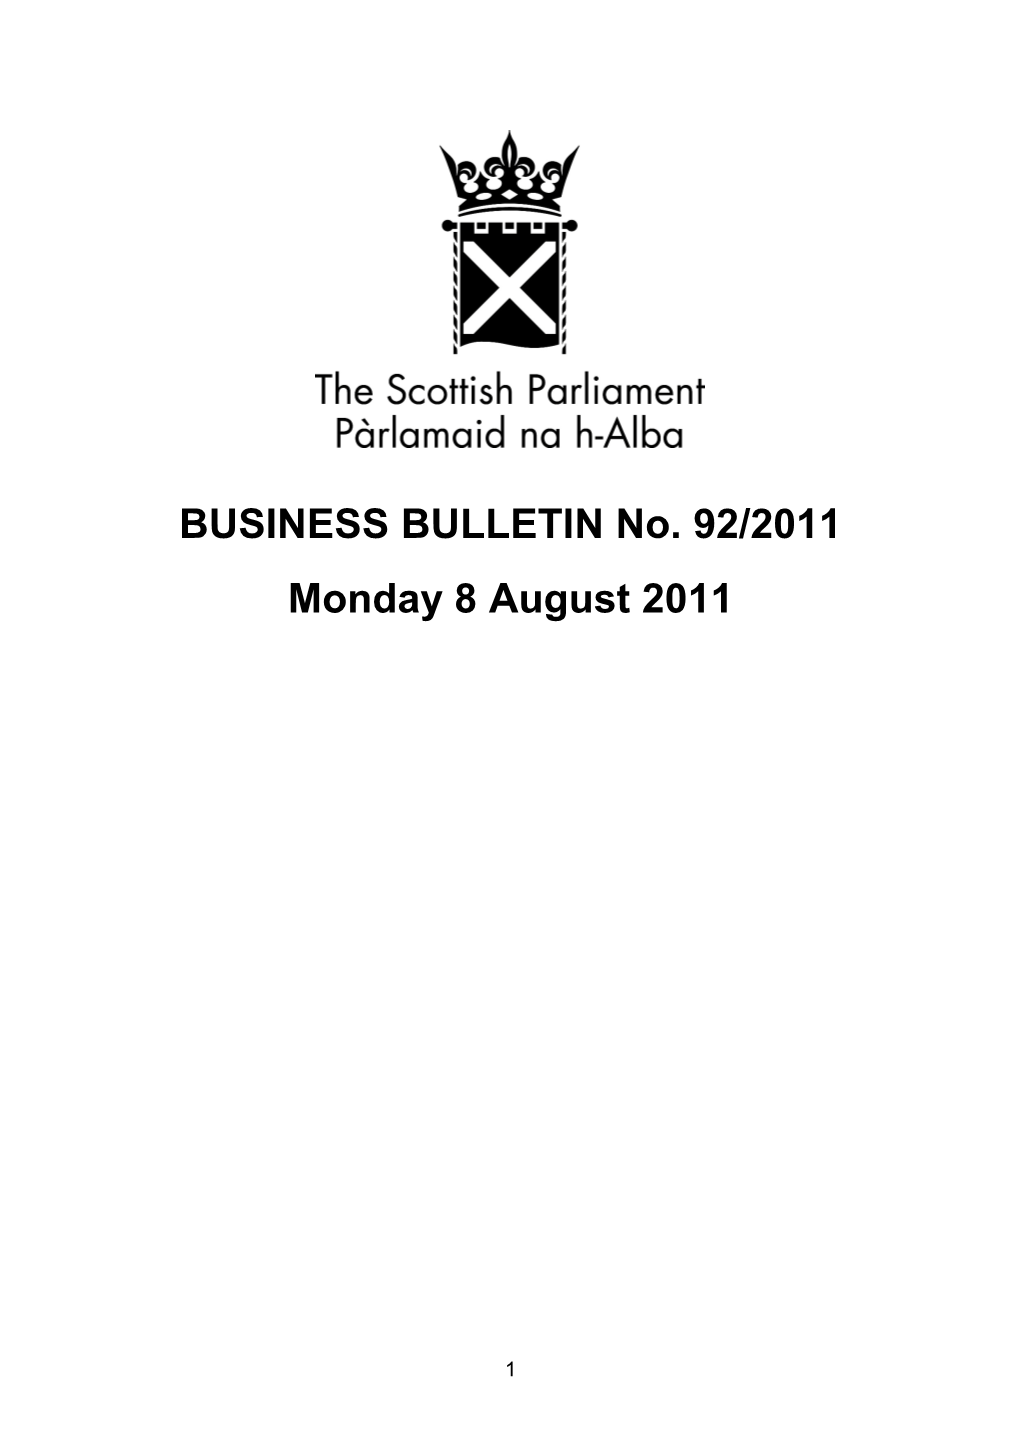 BUSINESS BULLETIN No. 92/2011 Monday 8 August 2011